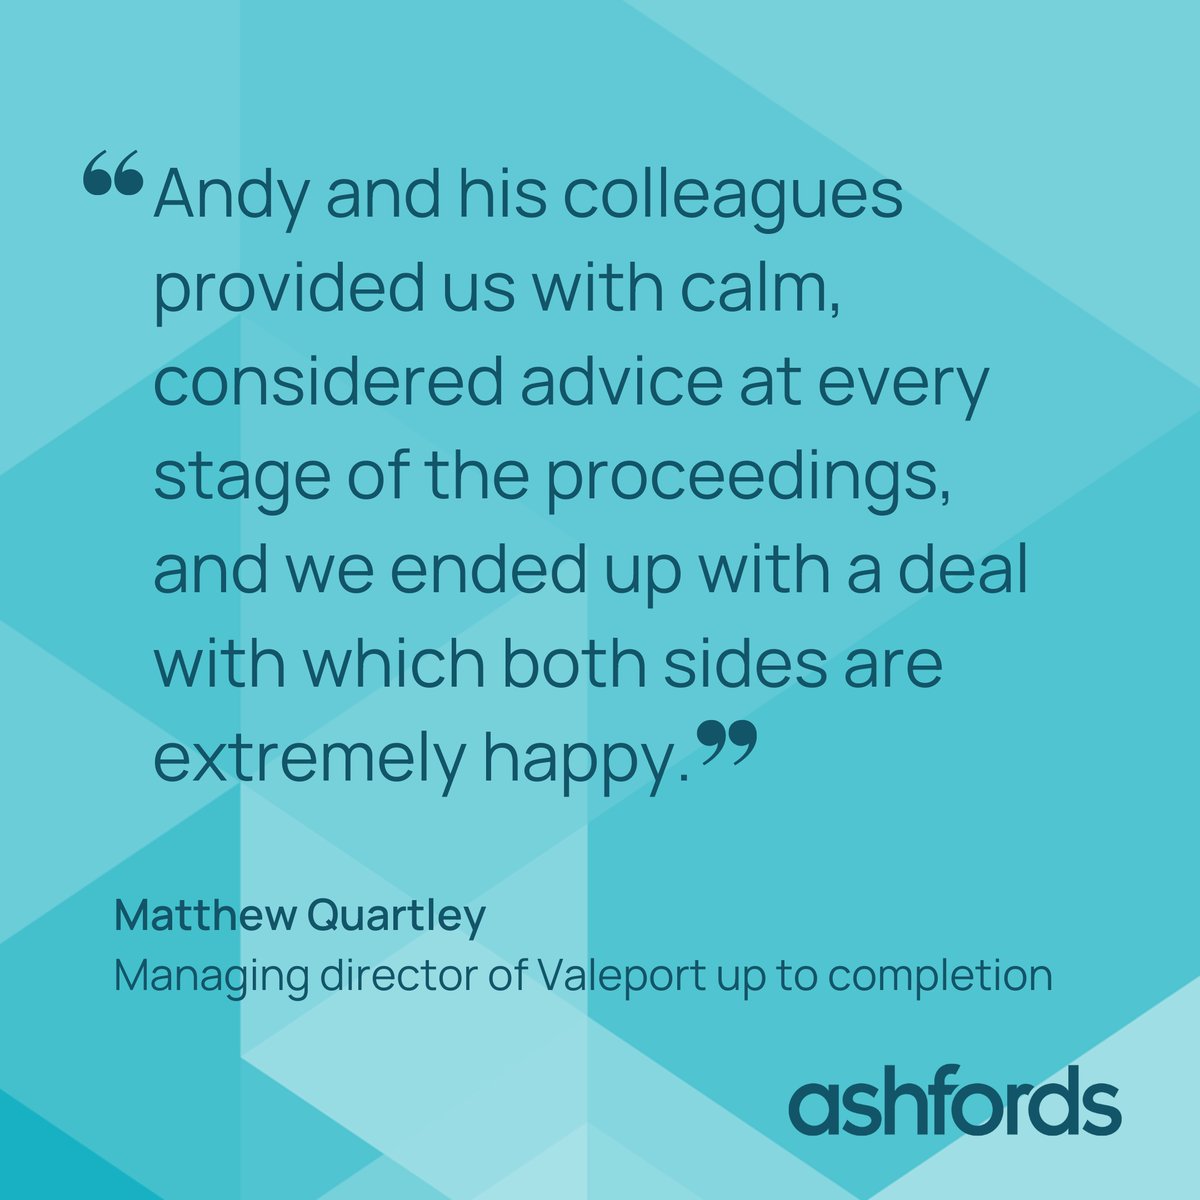 Our corporate team has advised the shareholders of Valeport, a Devon-based marine technology company, on its sale to subsea technology company Teledyne.

Read our article for more information on the sale
ashfords.co.uk/insights/news/…

#CorporateLaw #BusinessGrowth #MarineTechnology